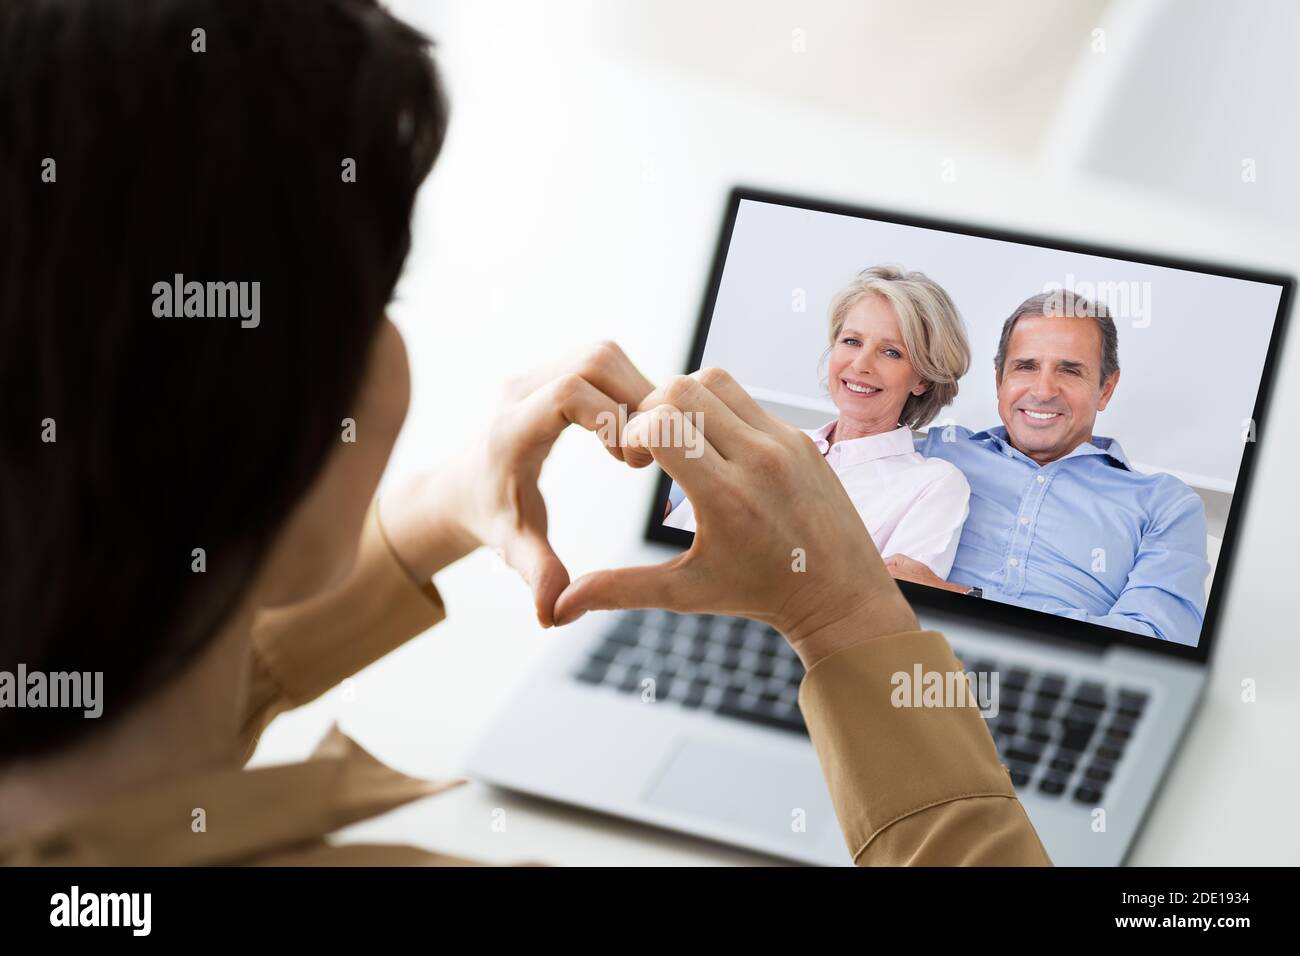 Video Conference Call With Parents On Laptop At Home Stock Photo